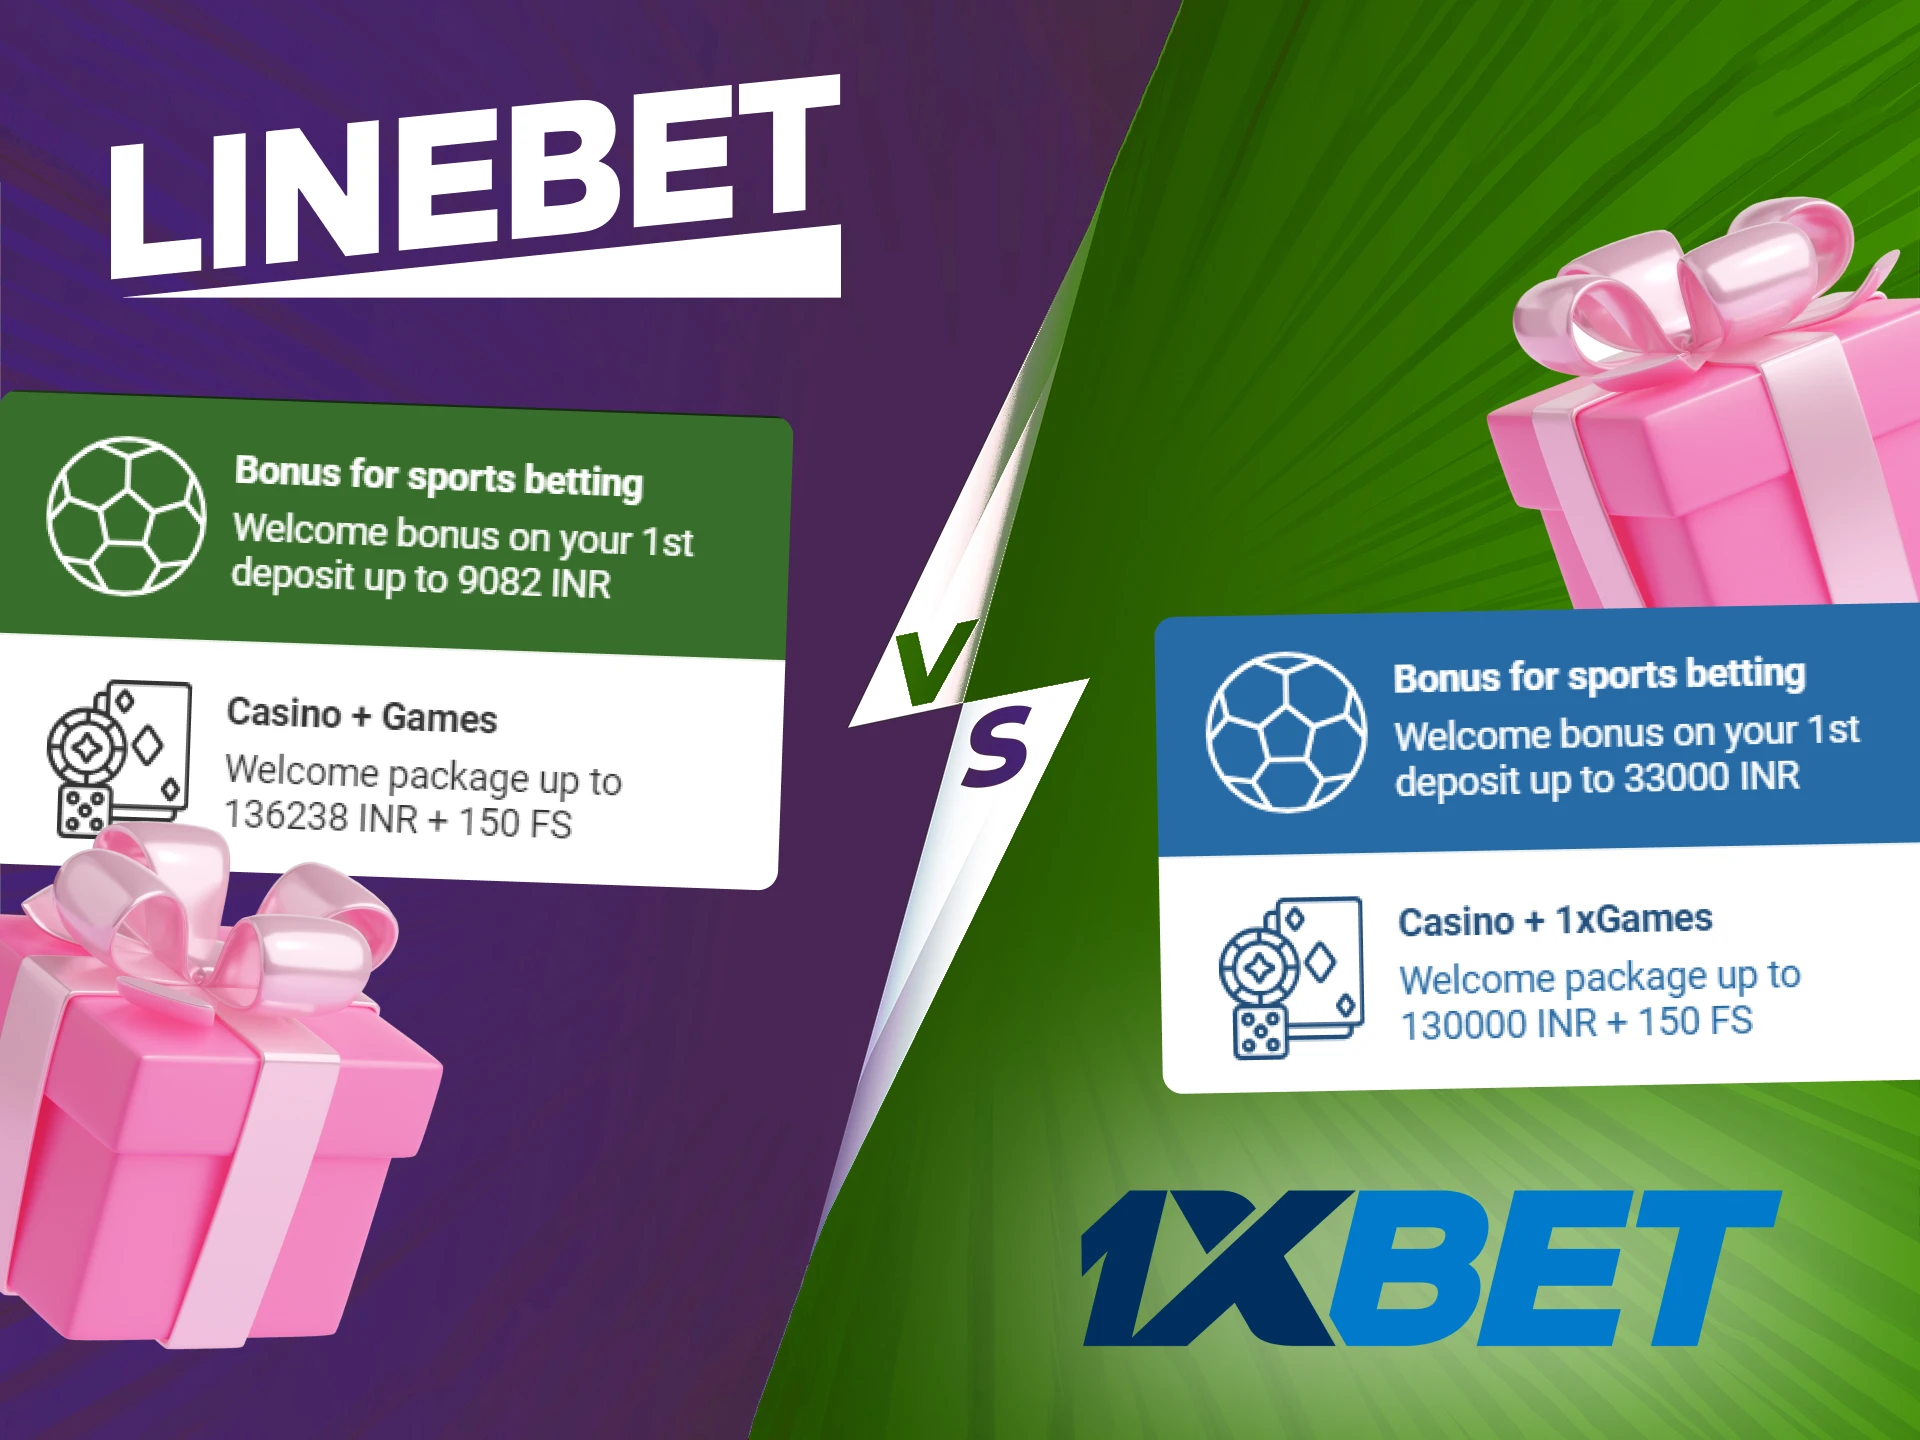 Linebet and 1xbet offer their players lucrative bonuses.